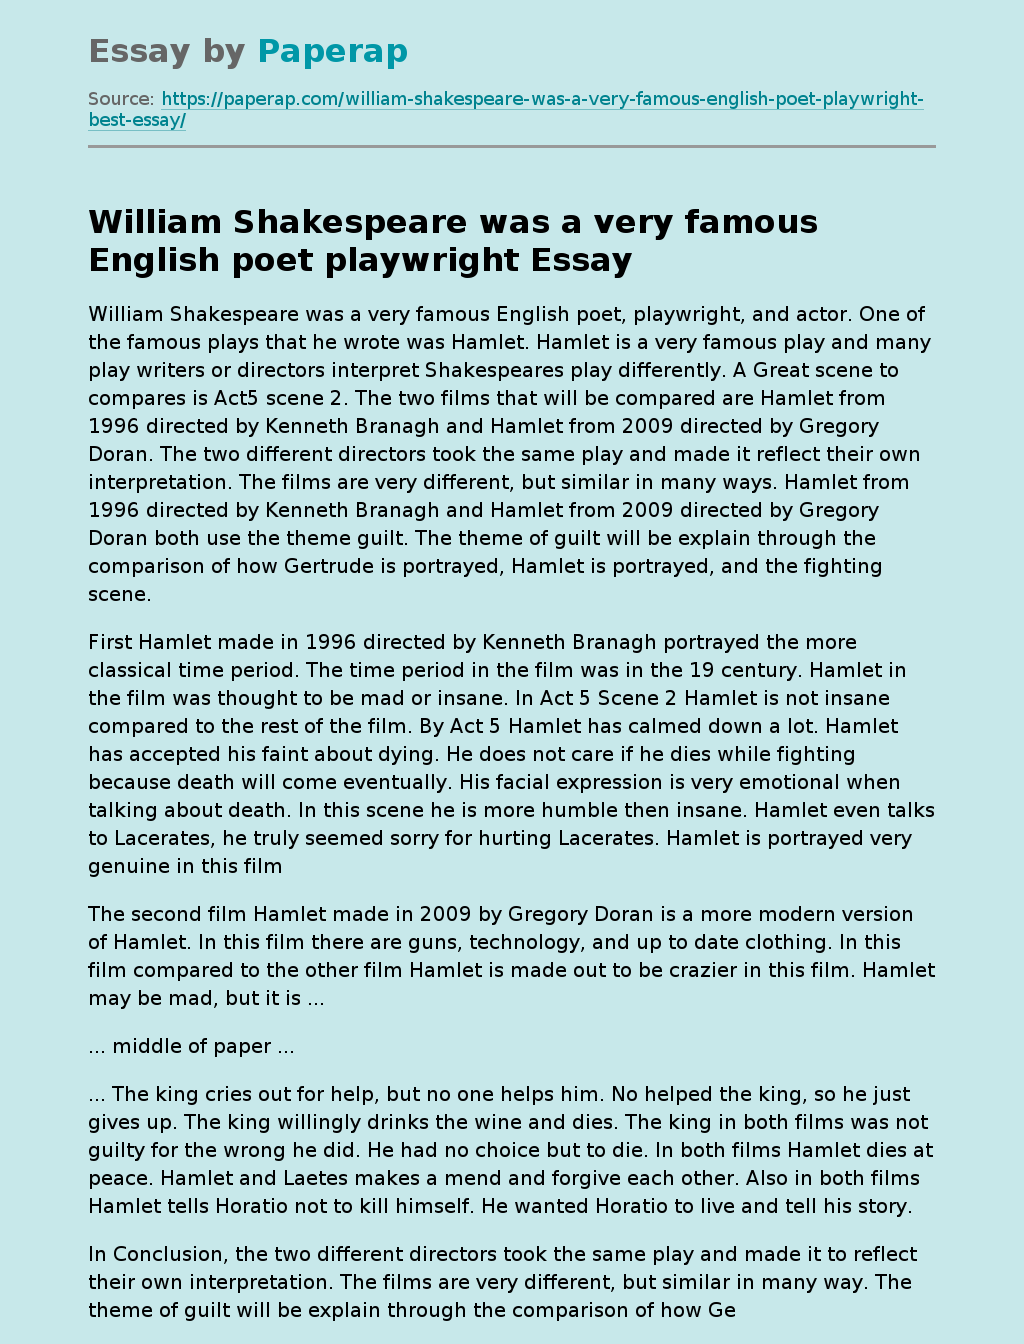 William Shakespeare was a very famous English poet playwright